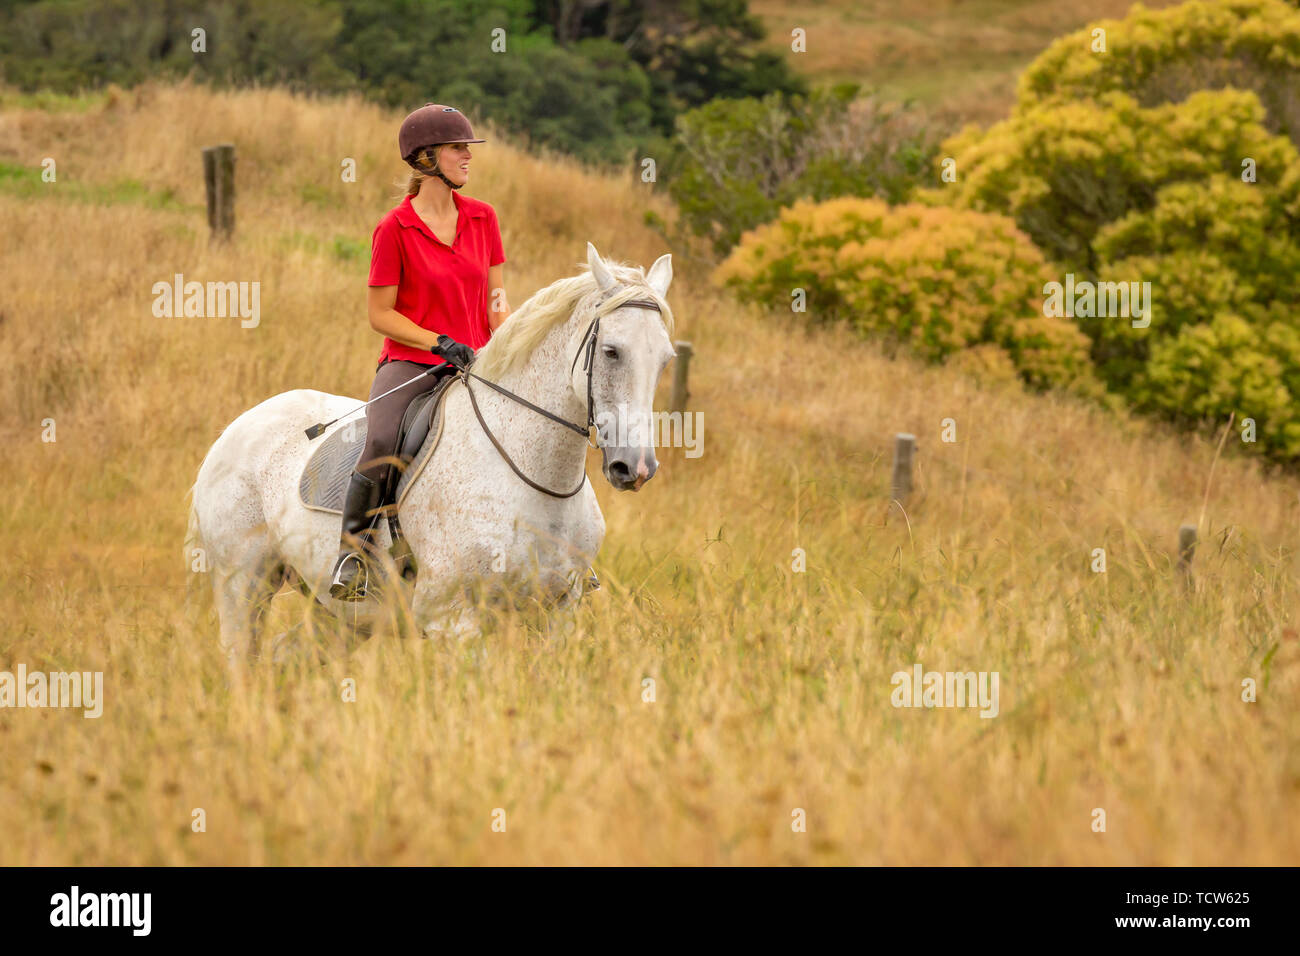 An attractive happy smiling young woman dressed in a red polo shirt riding her white horse through long dried golden colour grasses, copyspace to the  Stock Photo